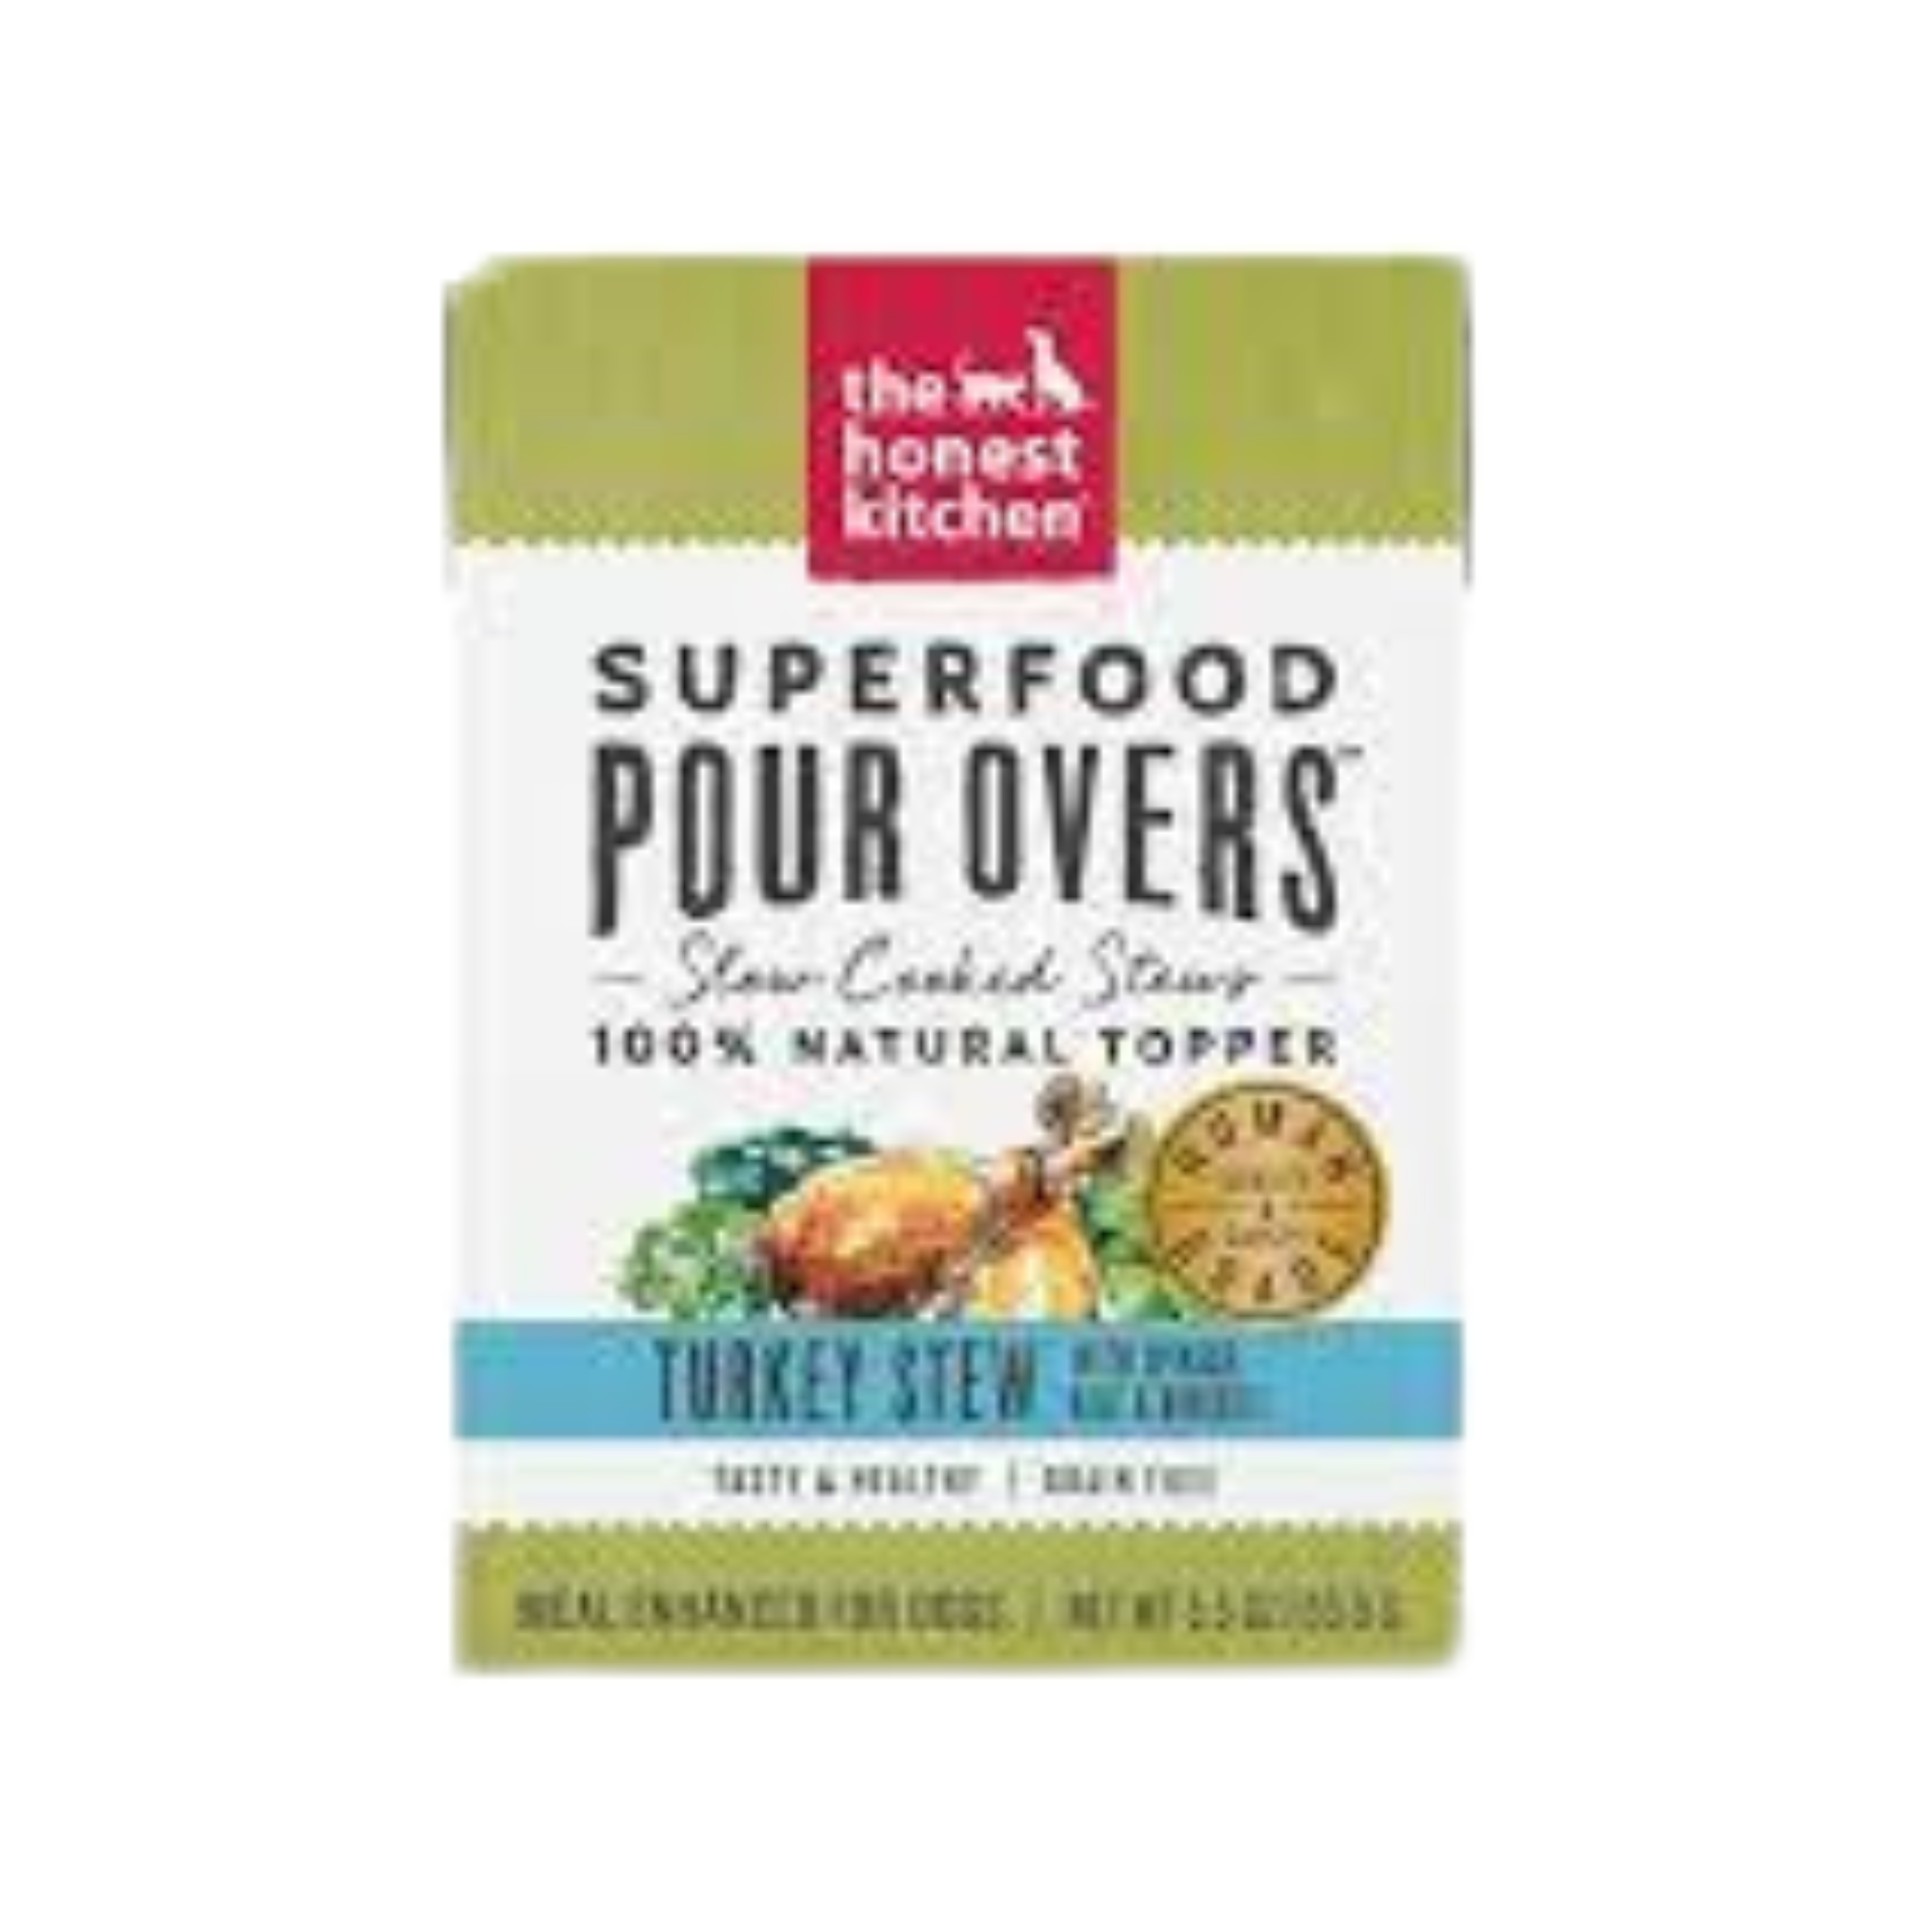 The Honest Kitchen Superfood Pour Overs- Turkey Stew